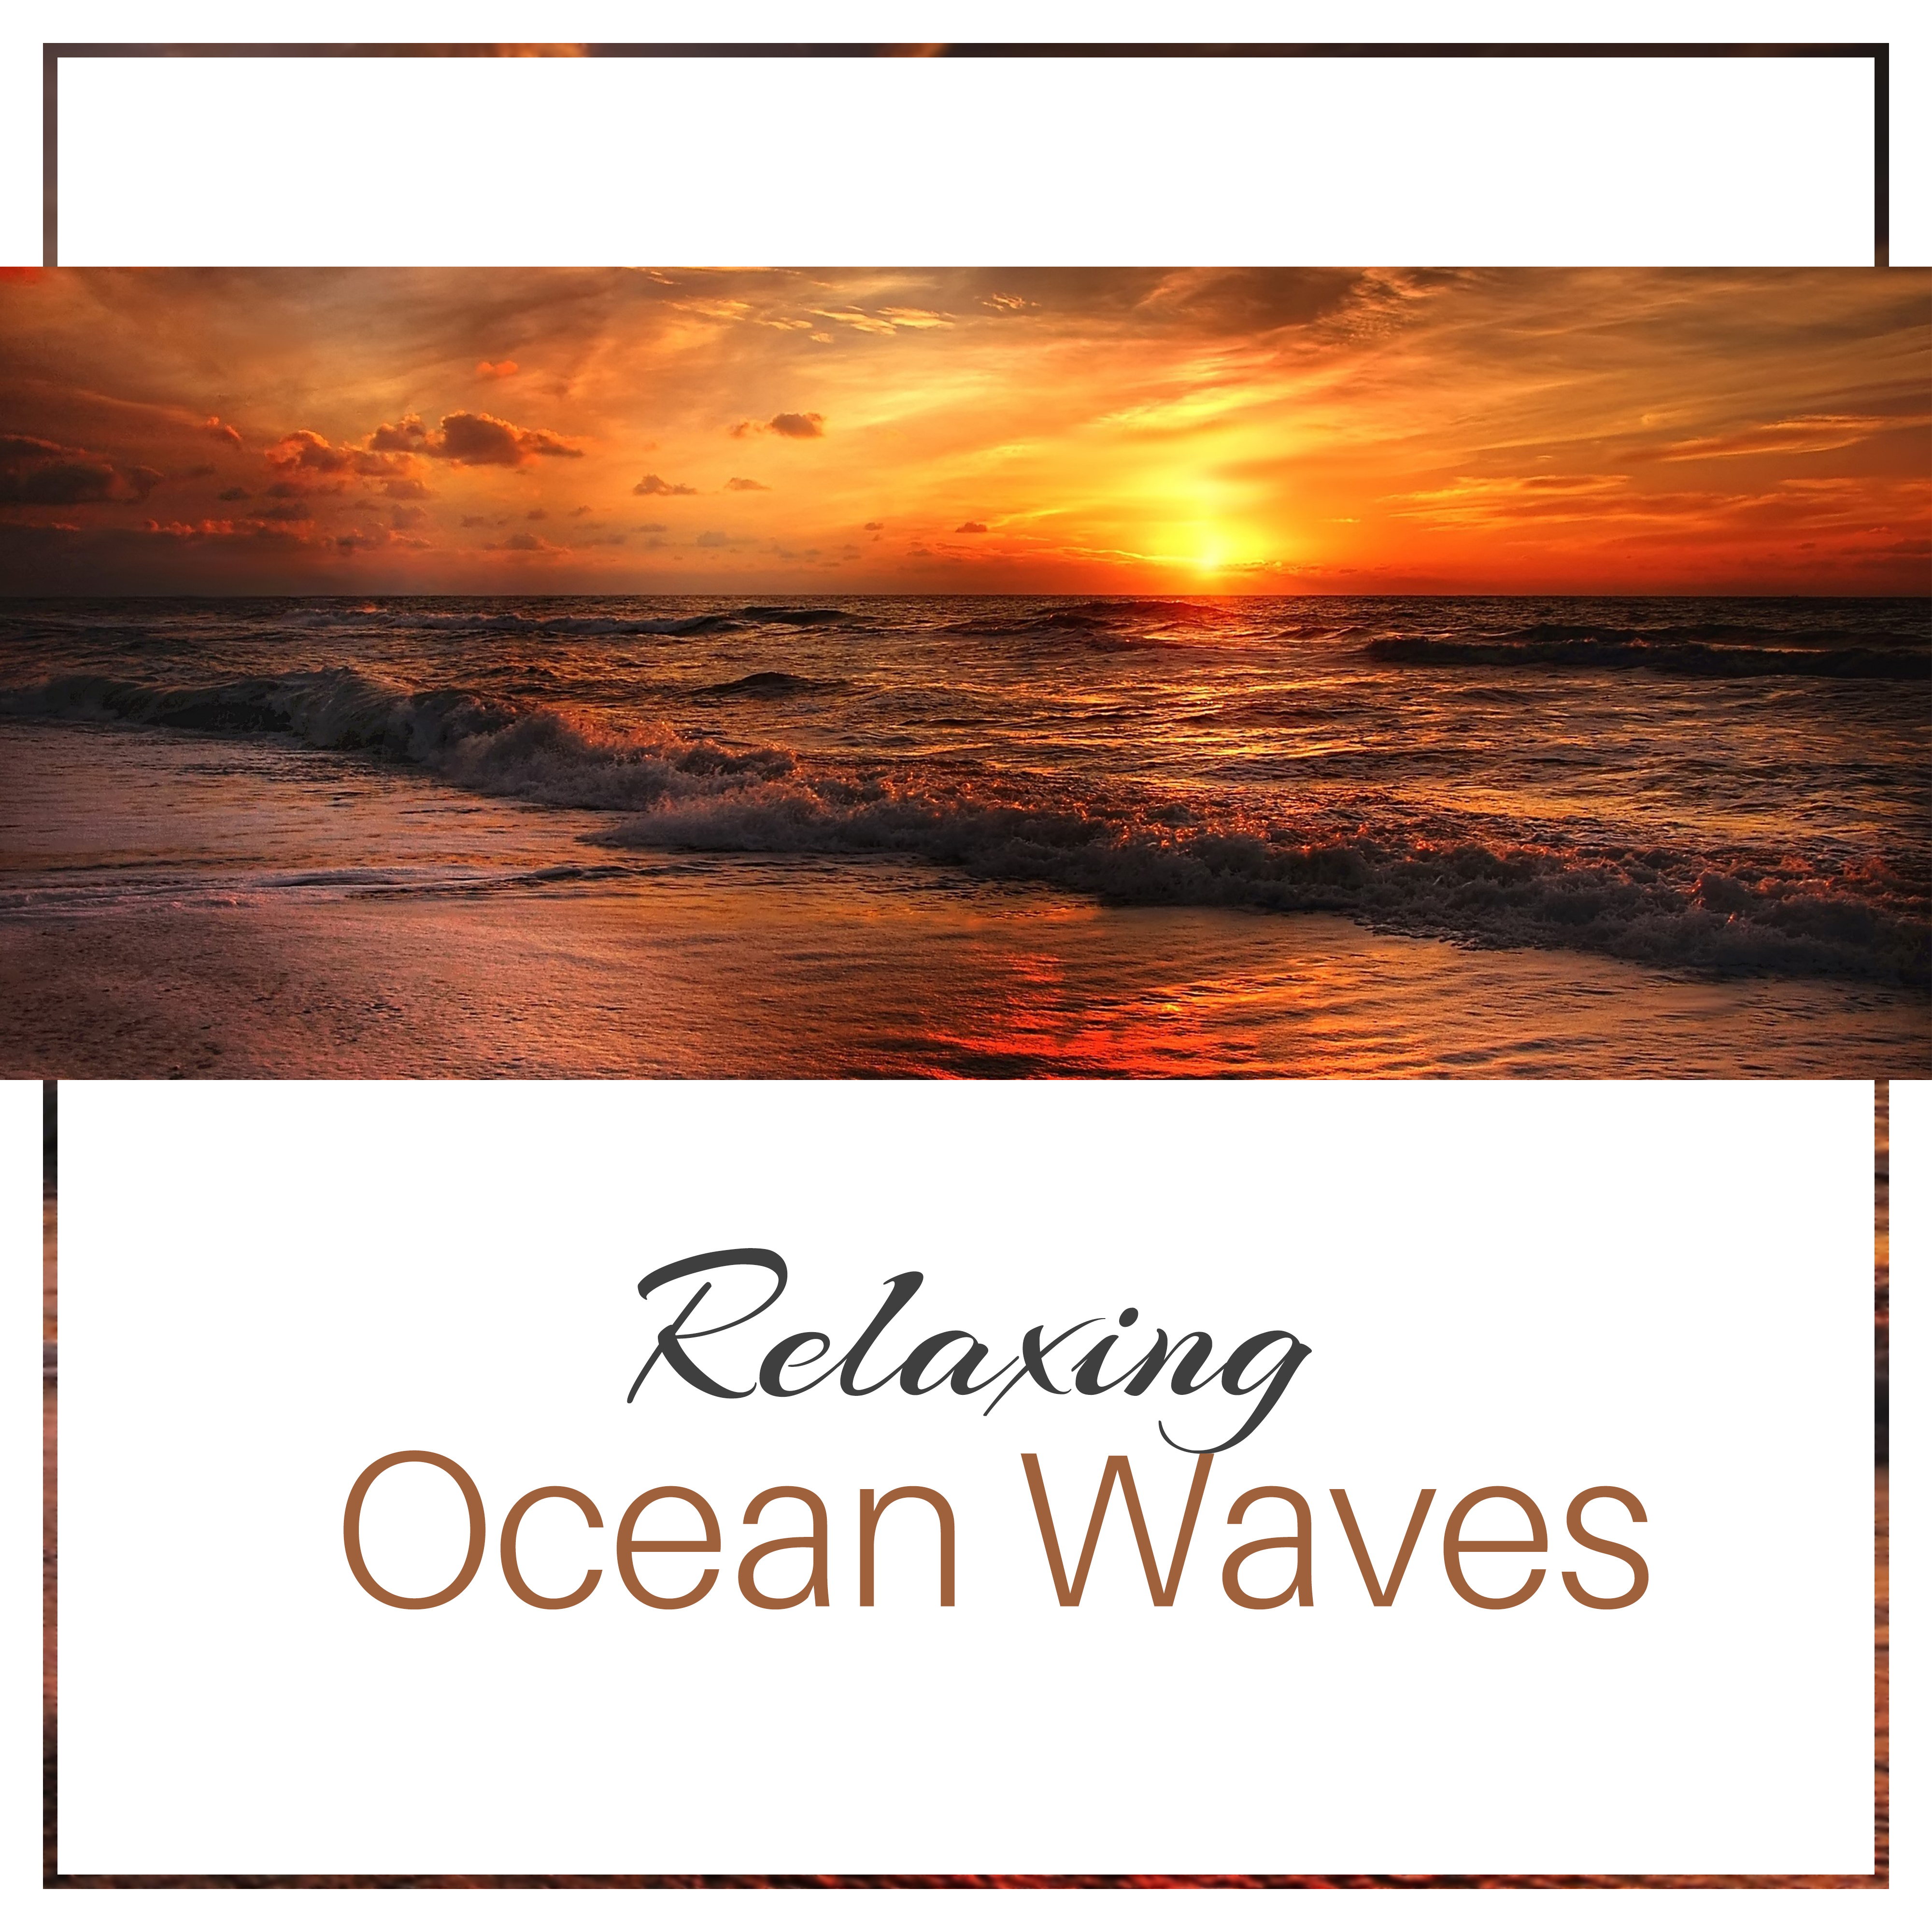 Relaxing Ocean Waves – Calm Sea Sounds, Water Relaxation, Music for Peaceful Spirit, Mind Rest